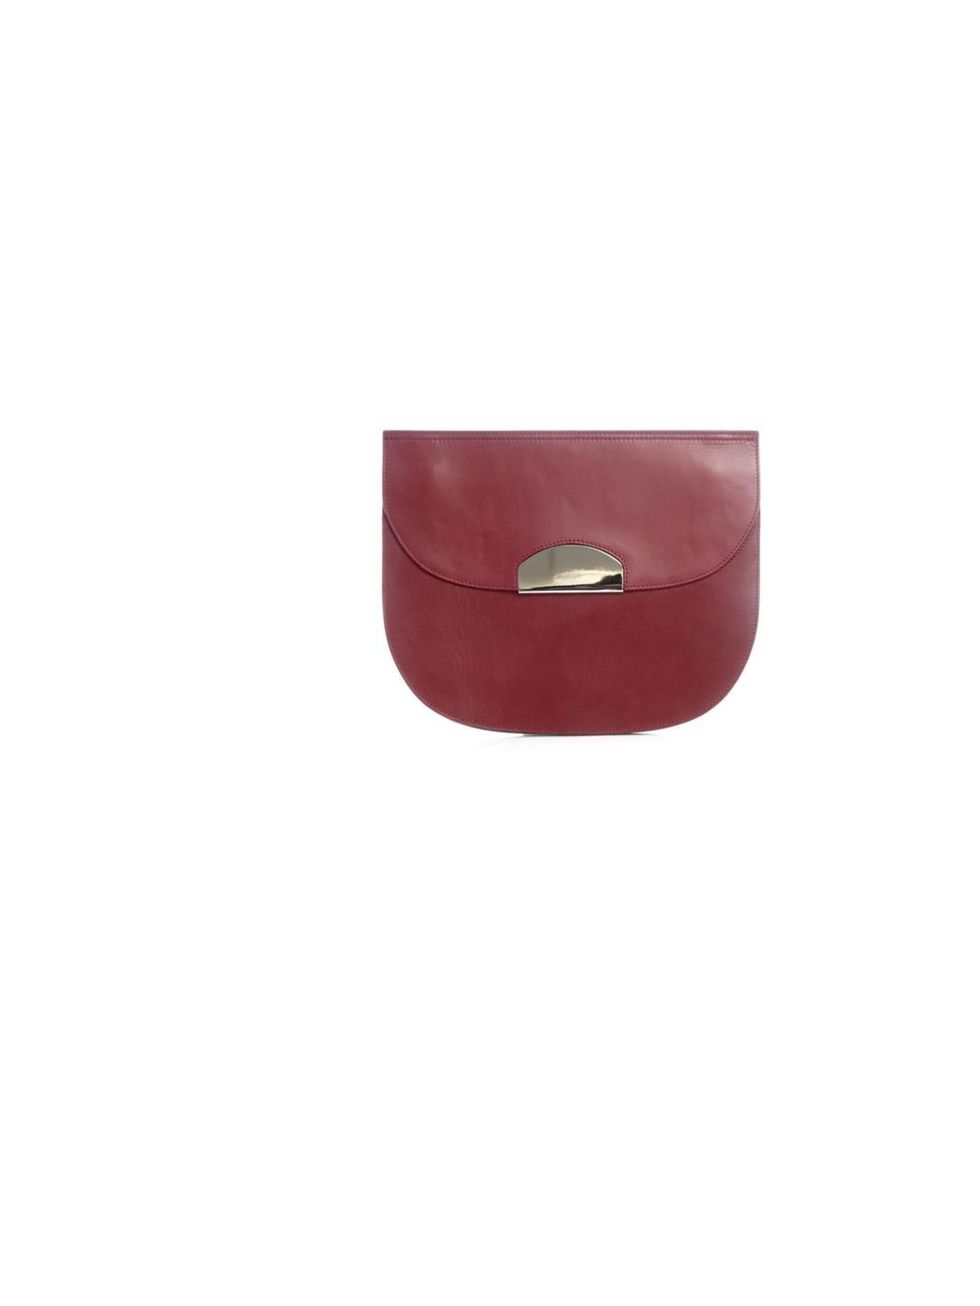 <p>Maison Martin Margiela half moon clutch, £818, Available from <a href="http://www.matchesfashion.com/product/130432">Matches Fashion</a></p>